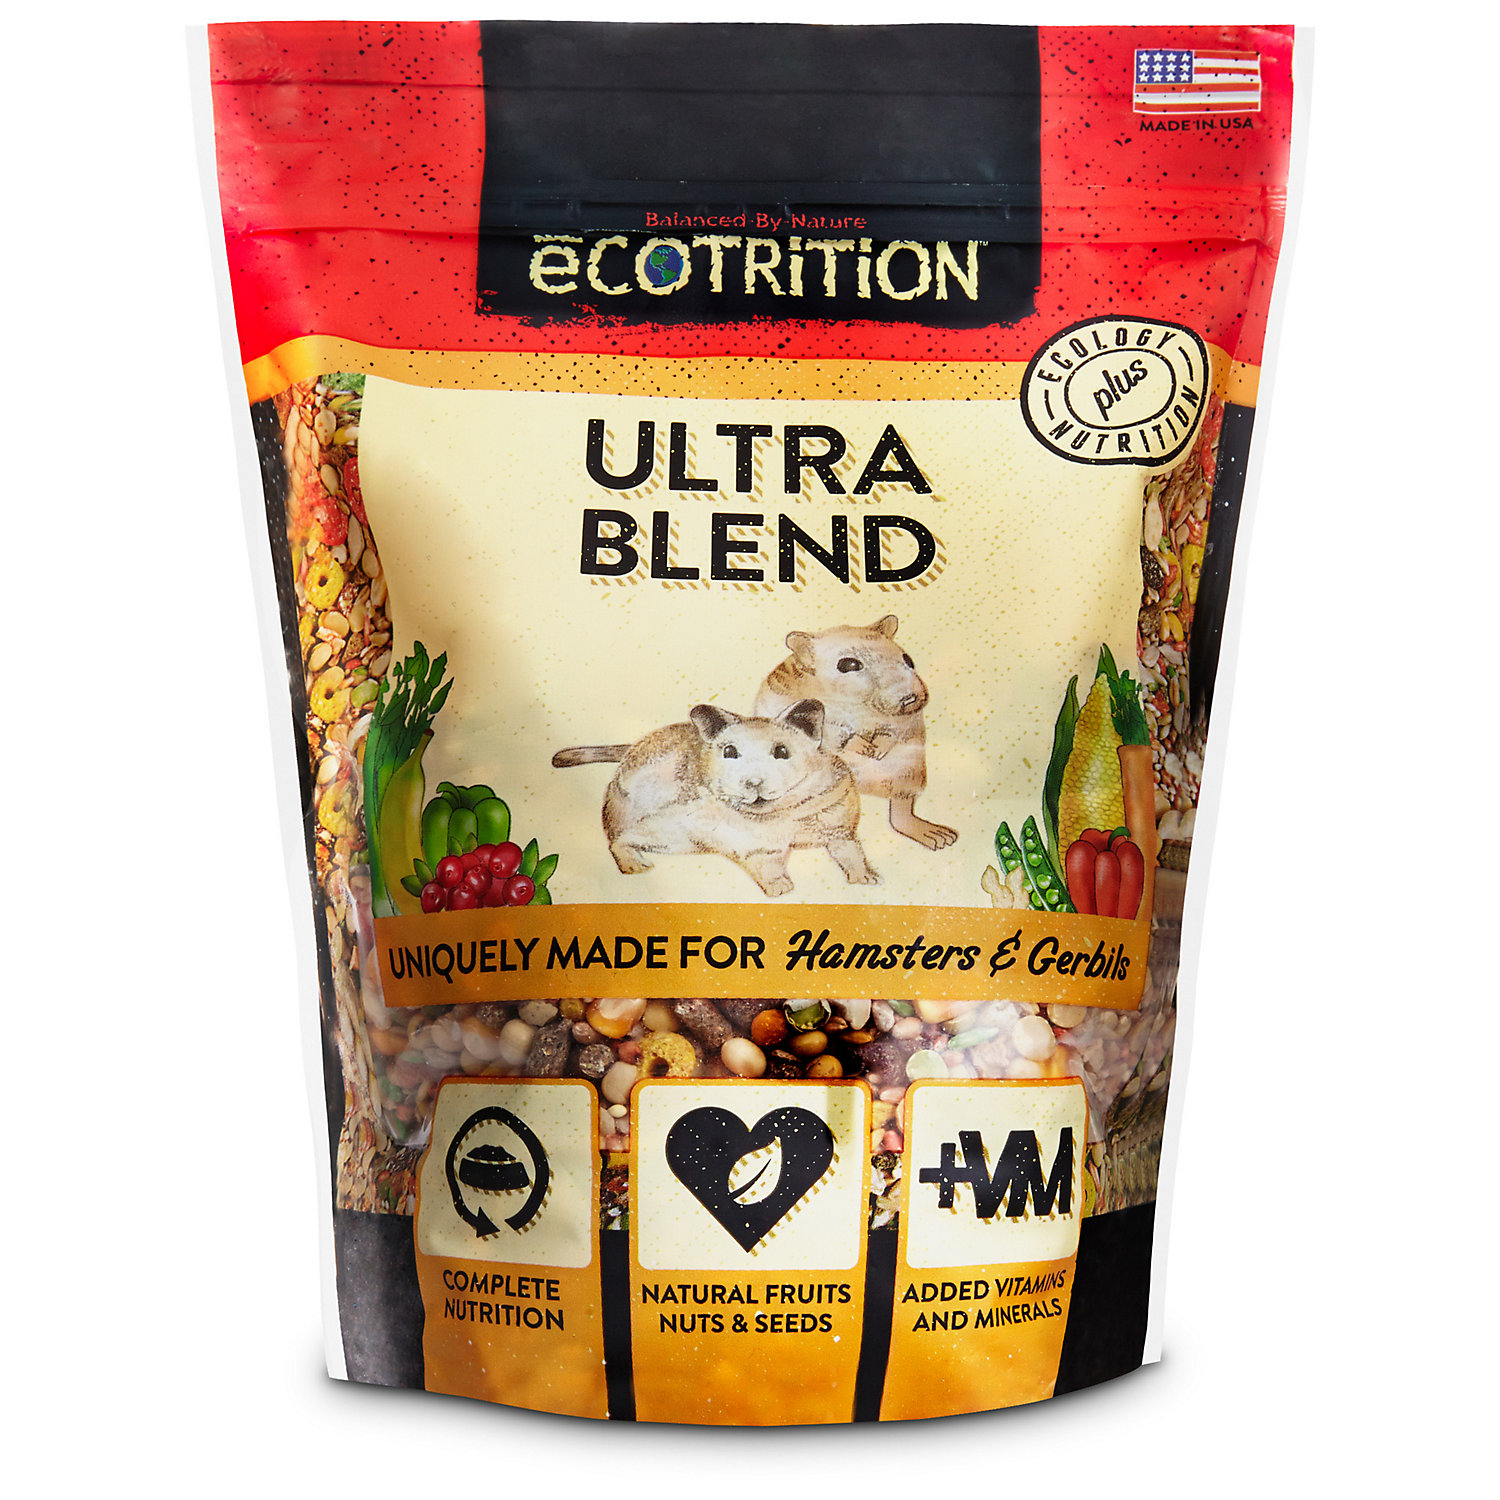 eCOTRITION Ultra Blend Hamster and Gerbil Food, 2 lbs